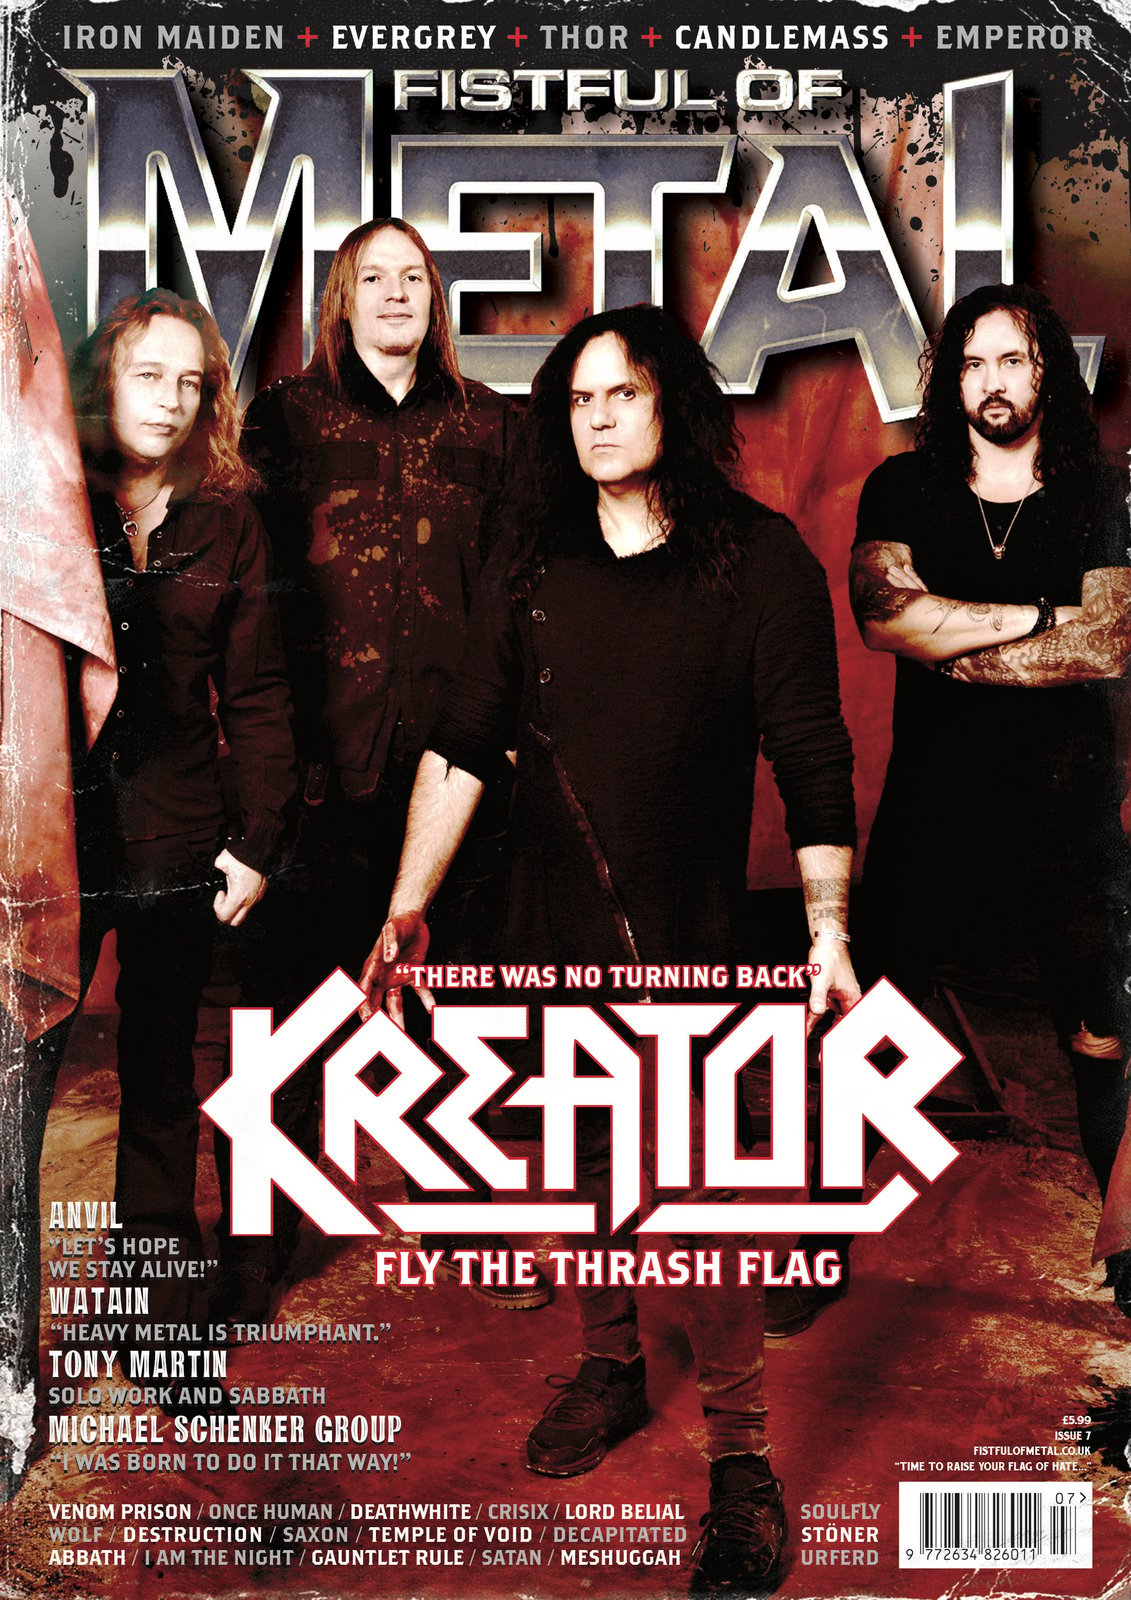 Also Ship Worldwide FISTFUL OF METAL MAGAZINE-ISSUE 3 *Post included to UK 